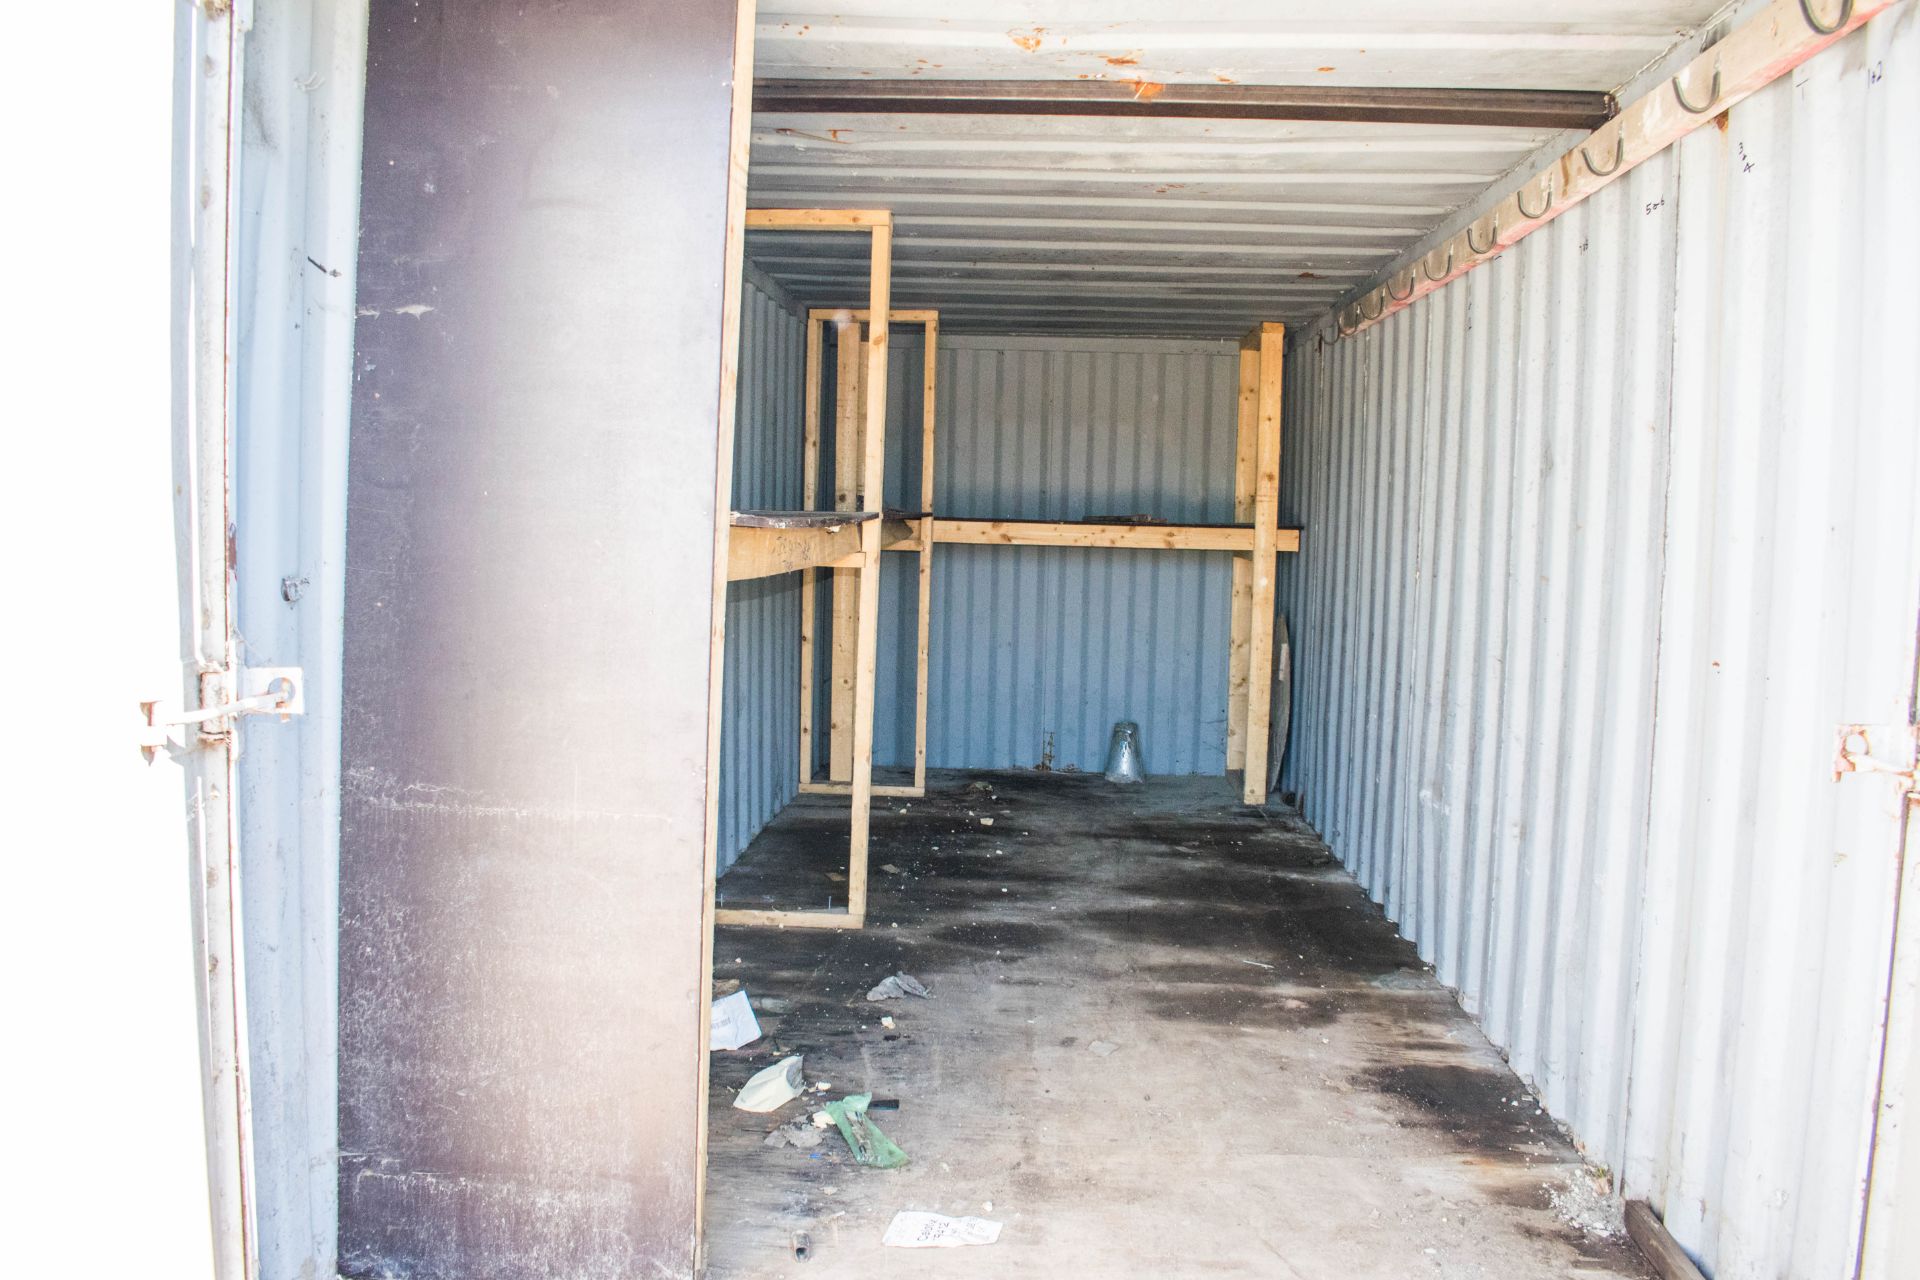 21 ft x 8 ft steel storage container - Image 3 of 4